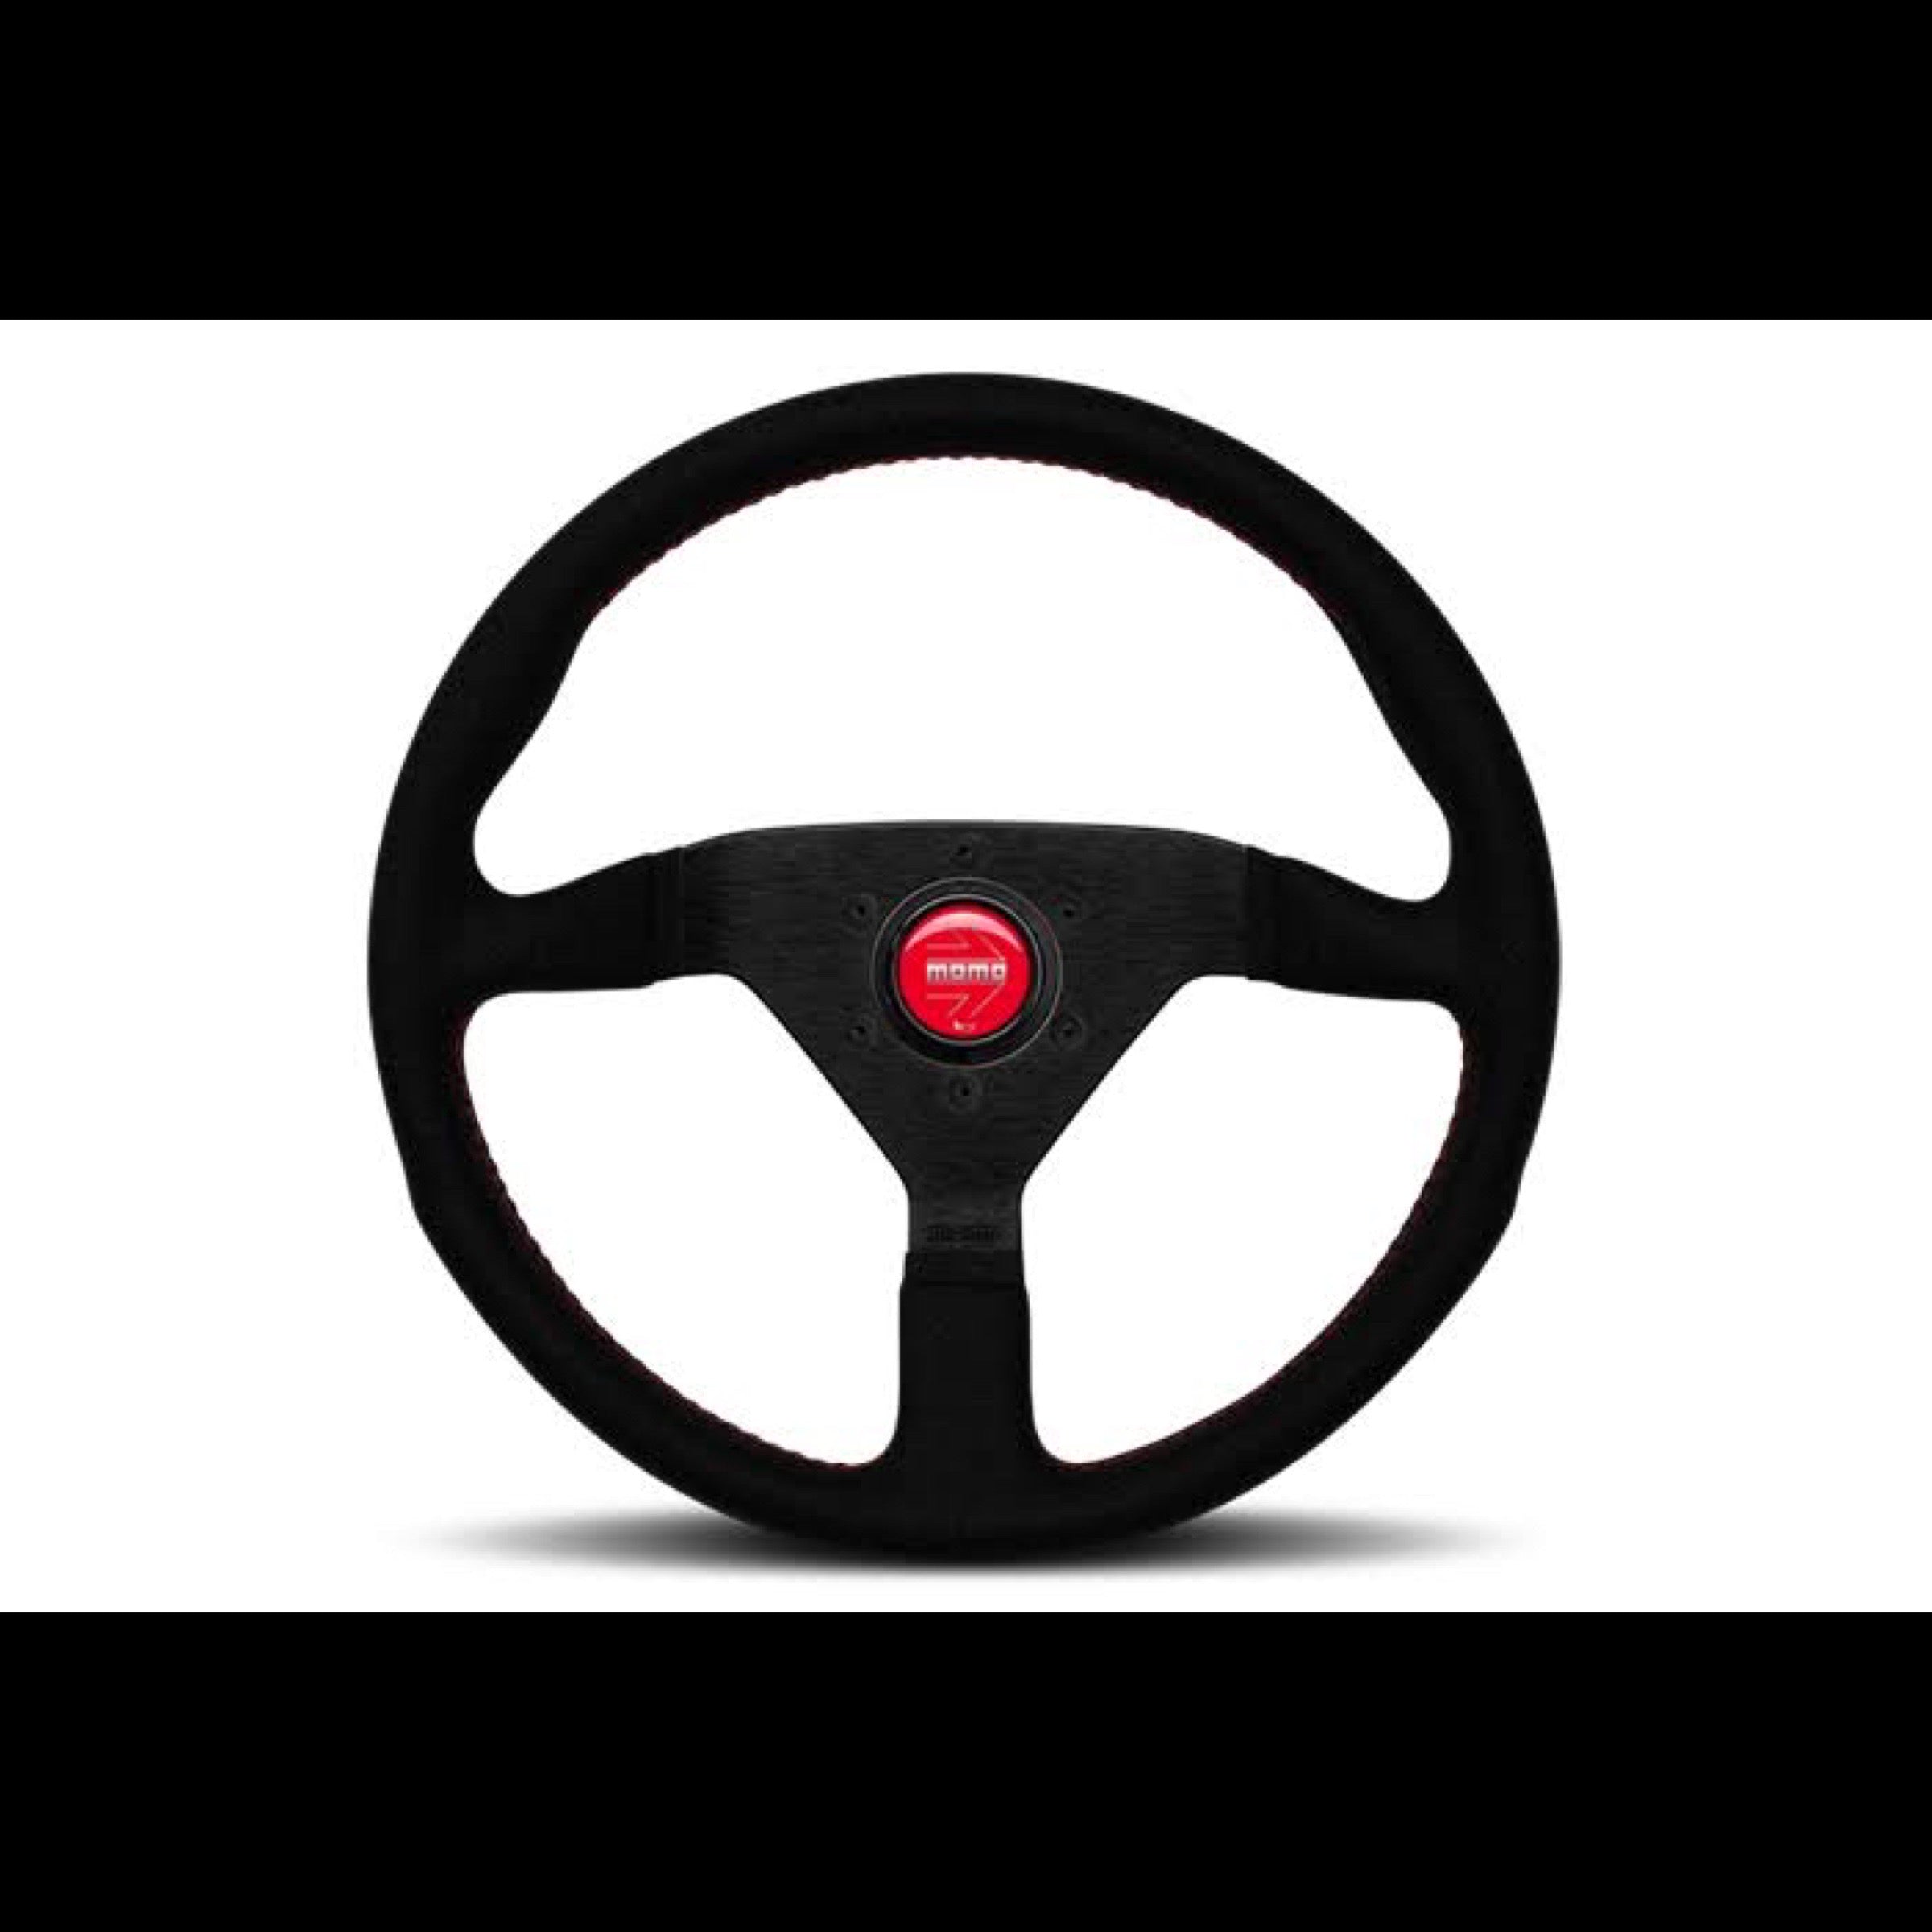 MOMO Monte Carlo steering wheel in black with red horn button